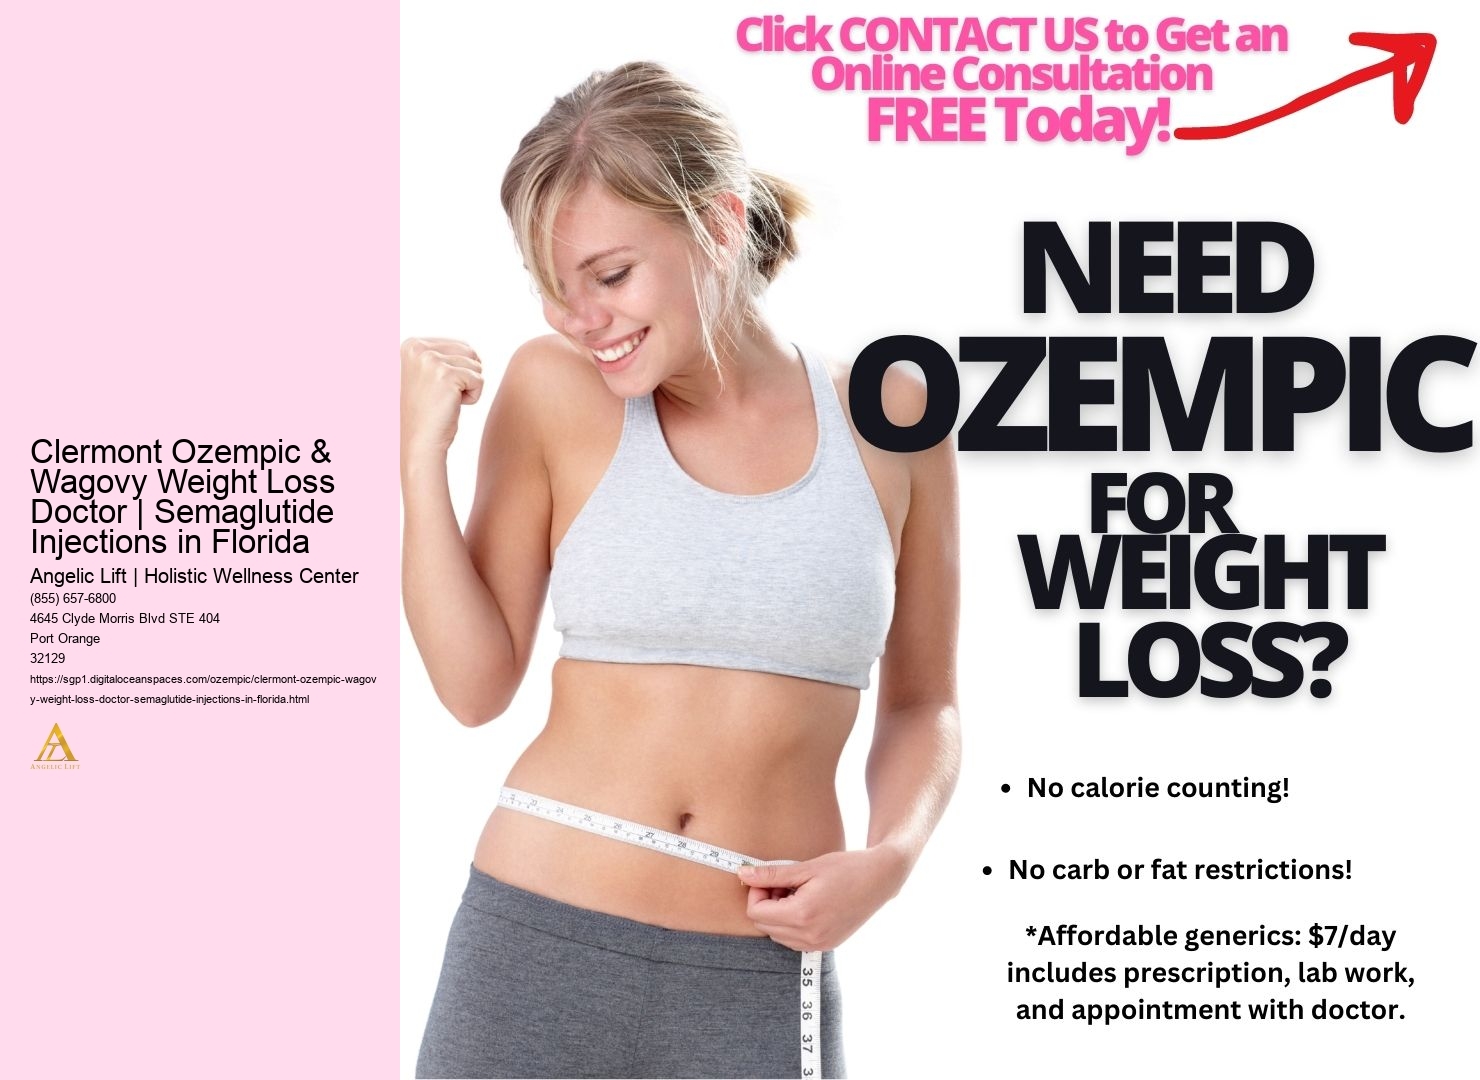 Clermont Ozempic & Wagovy Weight Loss Doctor | Semaglutide Injections in Florida